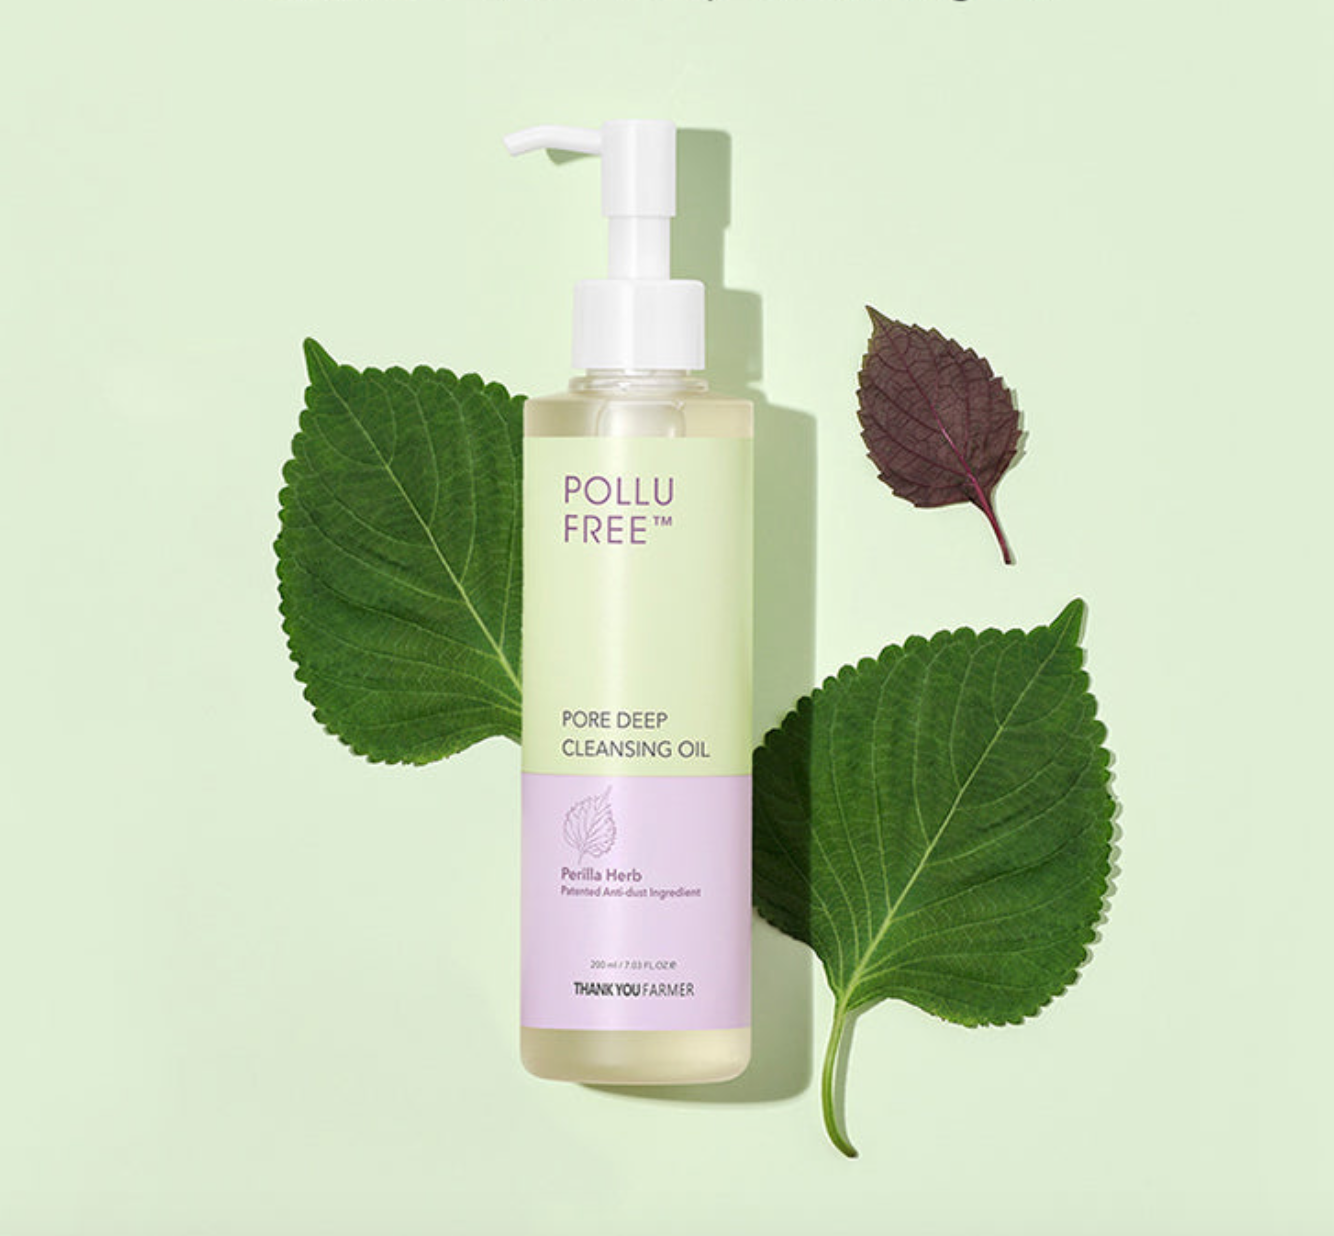 Pollufree Pore Deep Cleansing Oil